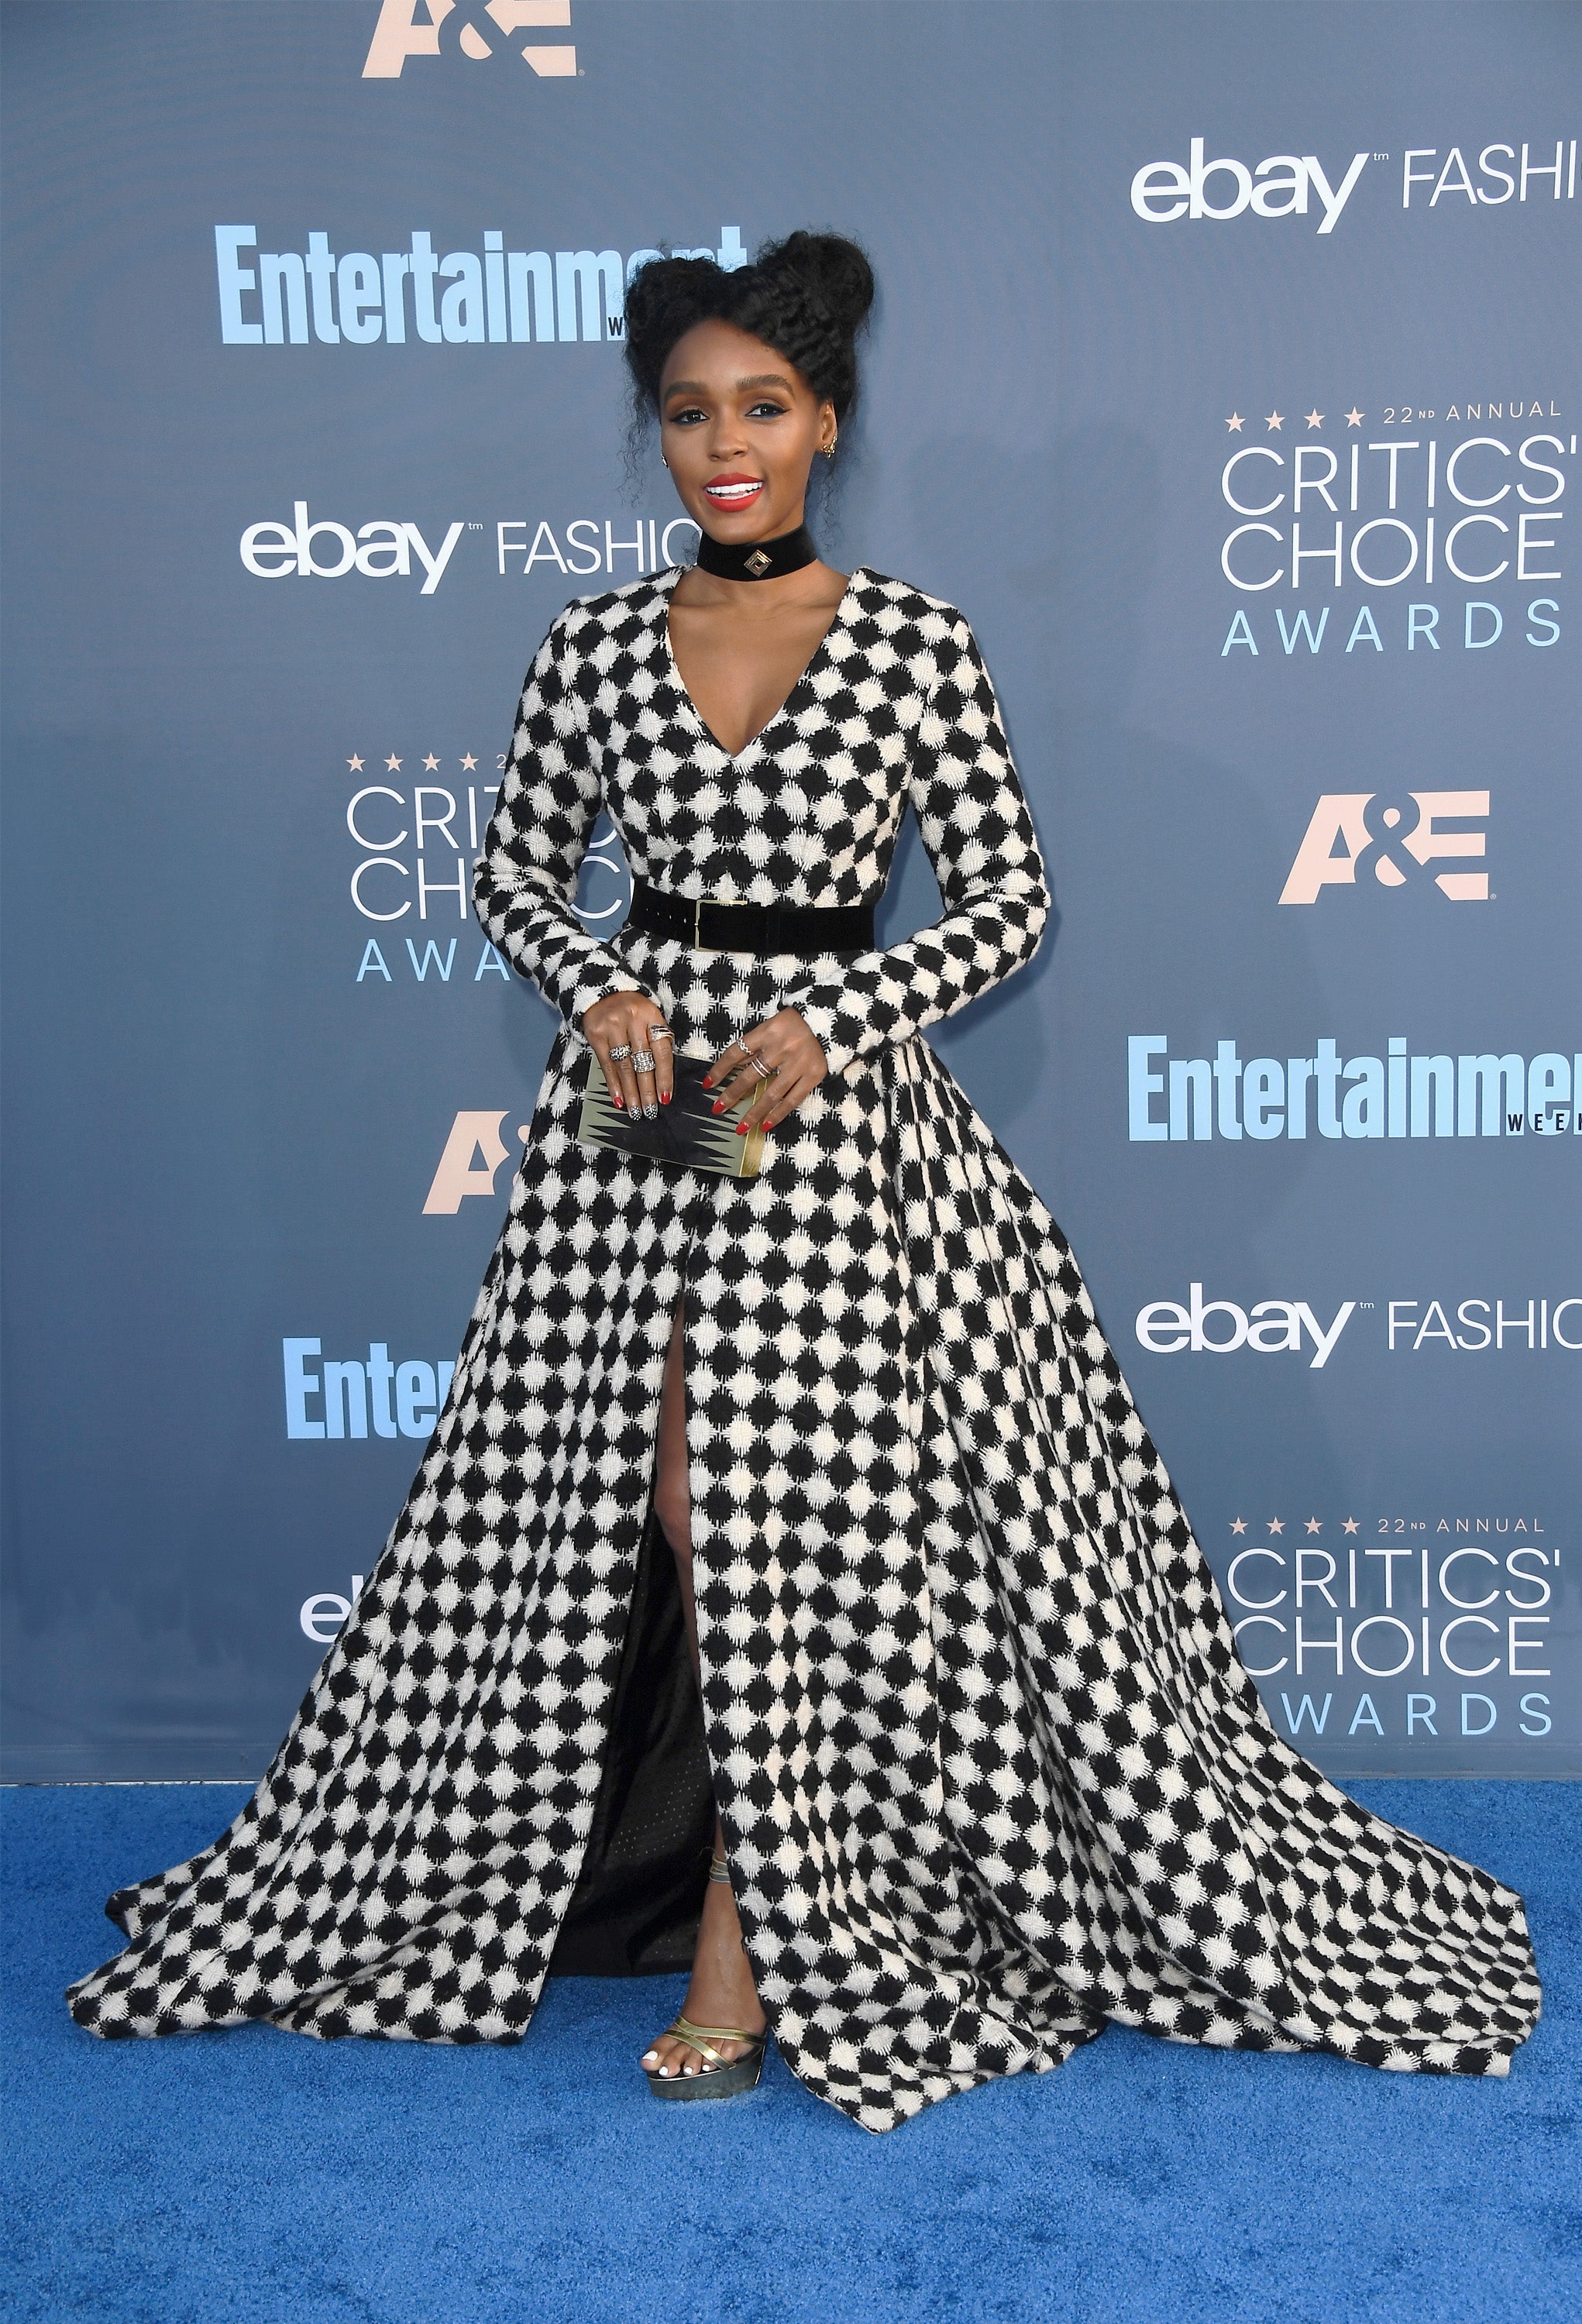 The Show-Stopping Looks From The 2016 Critics' Choice Awards
